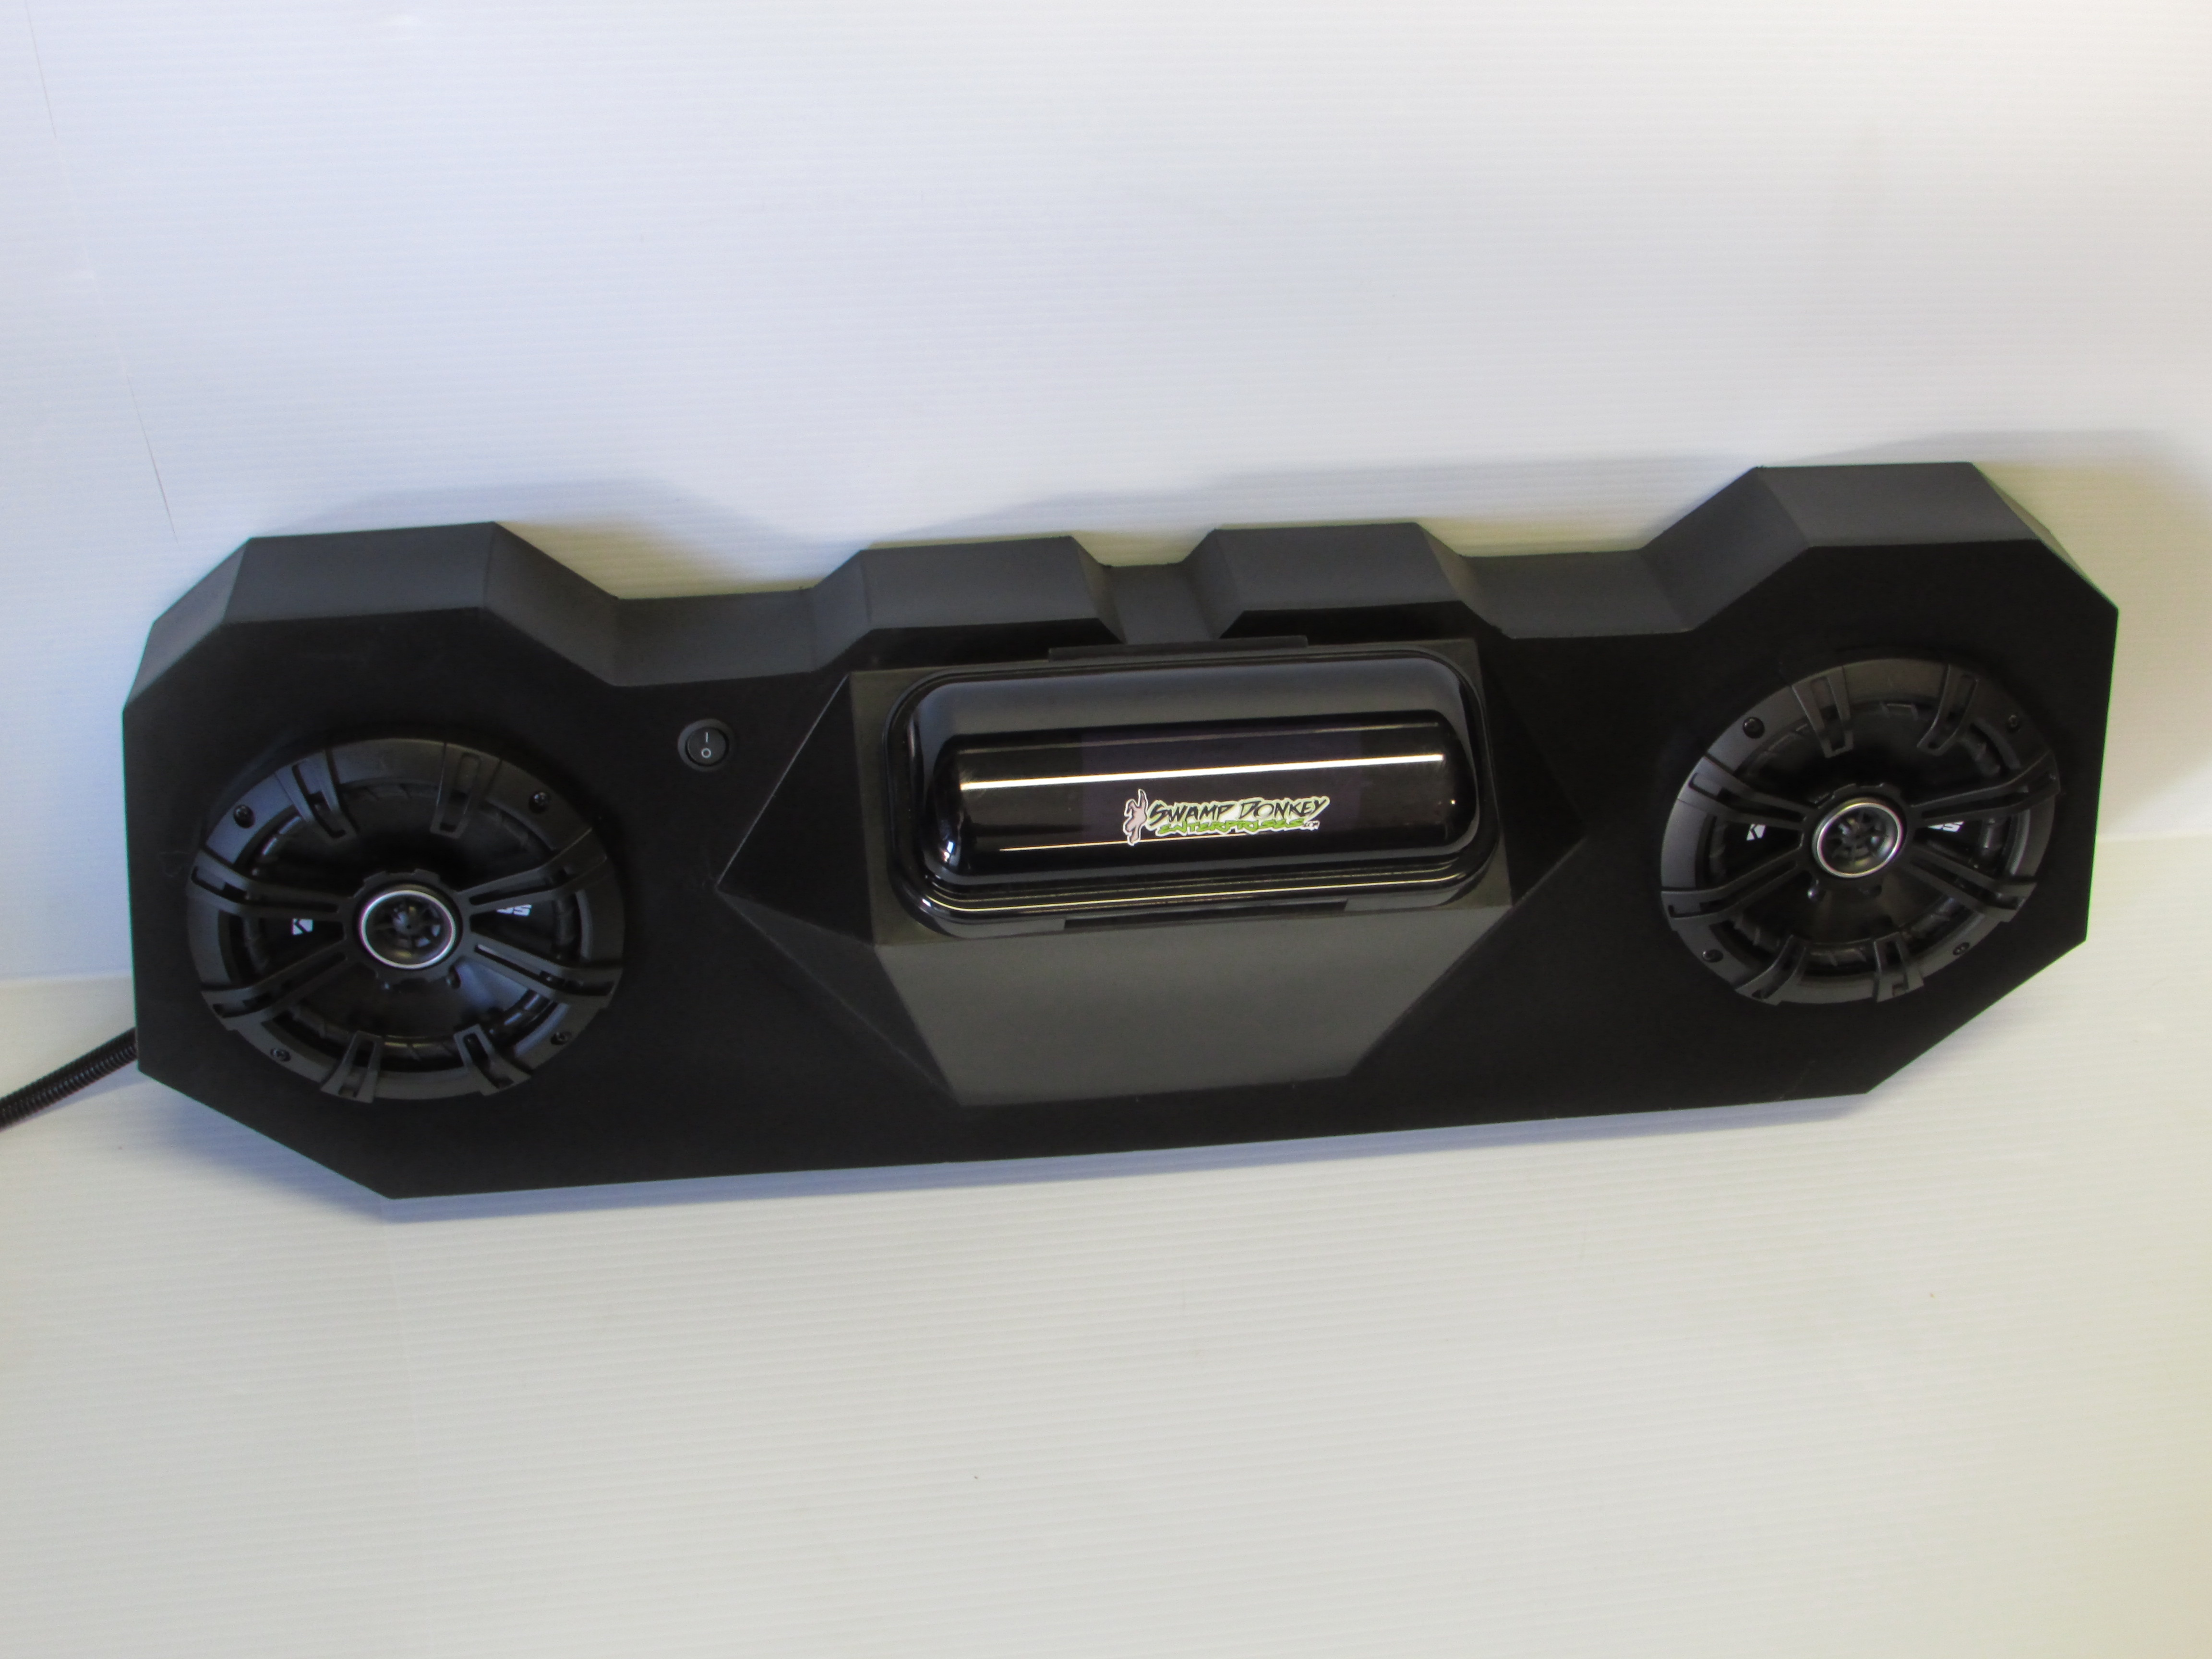 RZR 1000 2015+ 900 Sound Bar Tower Speakers Stereo Bluetooth Radio-1KSK2 - image 2 of 6